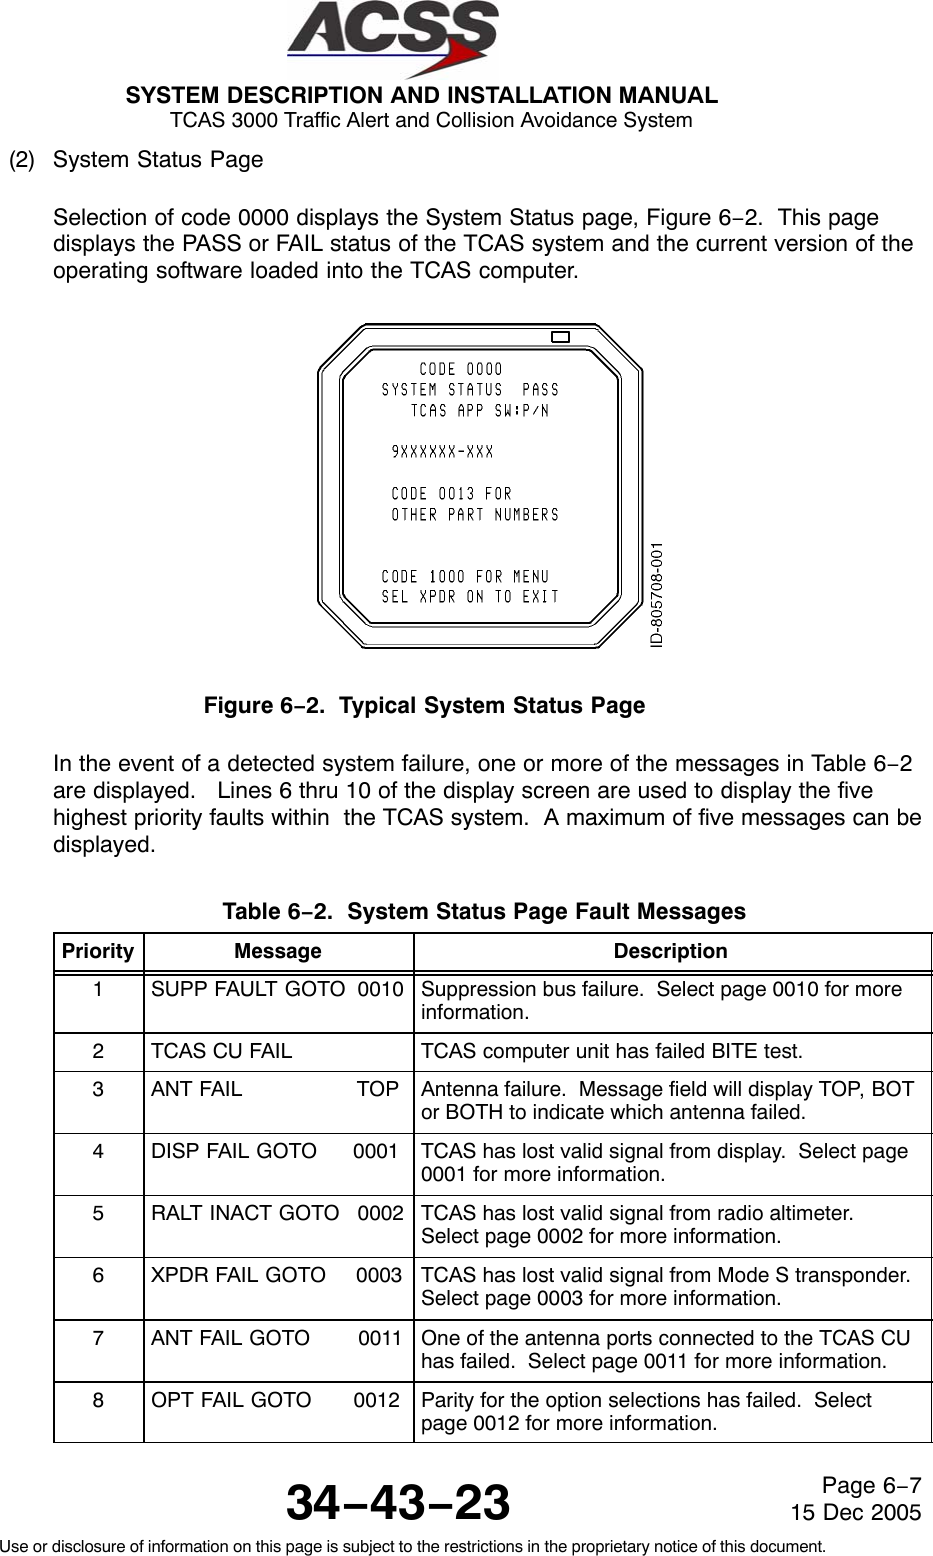 SYSTEM DESCRIPTION AND INSTALLATION MANUAL TCAS 3000 Traffic Alert and Collision Avoidance System34−43−23Use or disclosure of information on this page is subject to the restrictions in the proprietary notice of this document.Page 6−715 Dec 2005(2) System Status PageSelection of code 0000 displays the System Status page, Figure 6−2.  This pagedisplays the PASS or FAIL status of the TCAS system and the current version of theoperating software loaded into the TCAS computer.Figure 6−2.  Typical System Status PageIn the event of a detected system failure, one or more of the messages in Table 6−2are displayed.   Lines 6 thru 10 of the display screen are used to display the fivehighest priority faults within  the TCAS system.  A maximum of five messages can bedisplayed.Table 6−2.  System Status Page Fault Messages  Priority Message Description1SUPP FAULT GOTO  0010 Suppression bus failure.  Select page 0010 for moreinformation.2TCAS CU FAIL TCAS computer unit has failed BITE test.3ANT FAIL                   TOP Antenna failure.  Message field will display TOP, BOTor BOTH to indicate which antenna failed.4DISP FAIL GOTO      0001 TCAS has lost valid signal from display.  Select page0001 for more information.5RALT INACT GOTO   0002 TCAS has lost valid signal from radio altimeter.Select page 0002 for more information.6XPDR FAIL GOTO     0003 TCAS has lost valid signal from Mode S transponder.Select page 0003 for more information.7ANT FAIL GOTO        0011 One of the antenna ports connected to the TCAS CUhas failed.  Select page 0011 for more information.8OPT FAIL GOTO       0012 Parity for the option selections has failed.  Selectpage 0012 for more information.